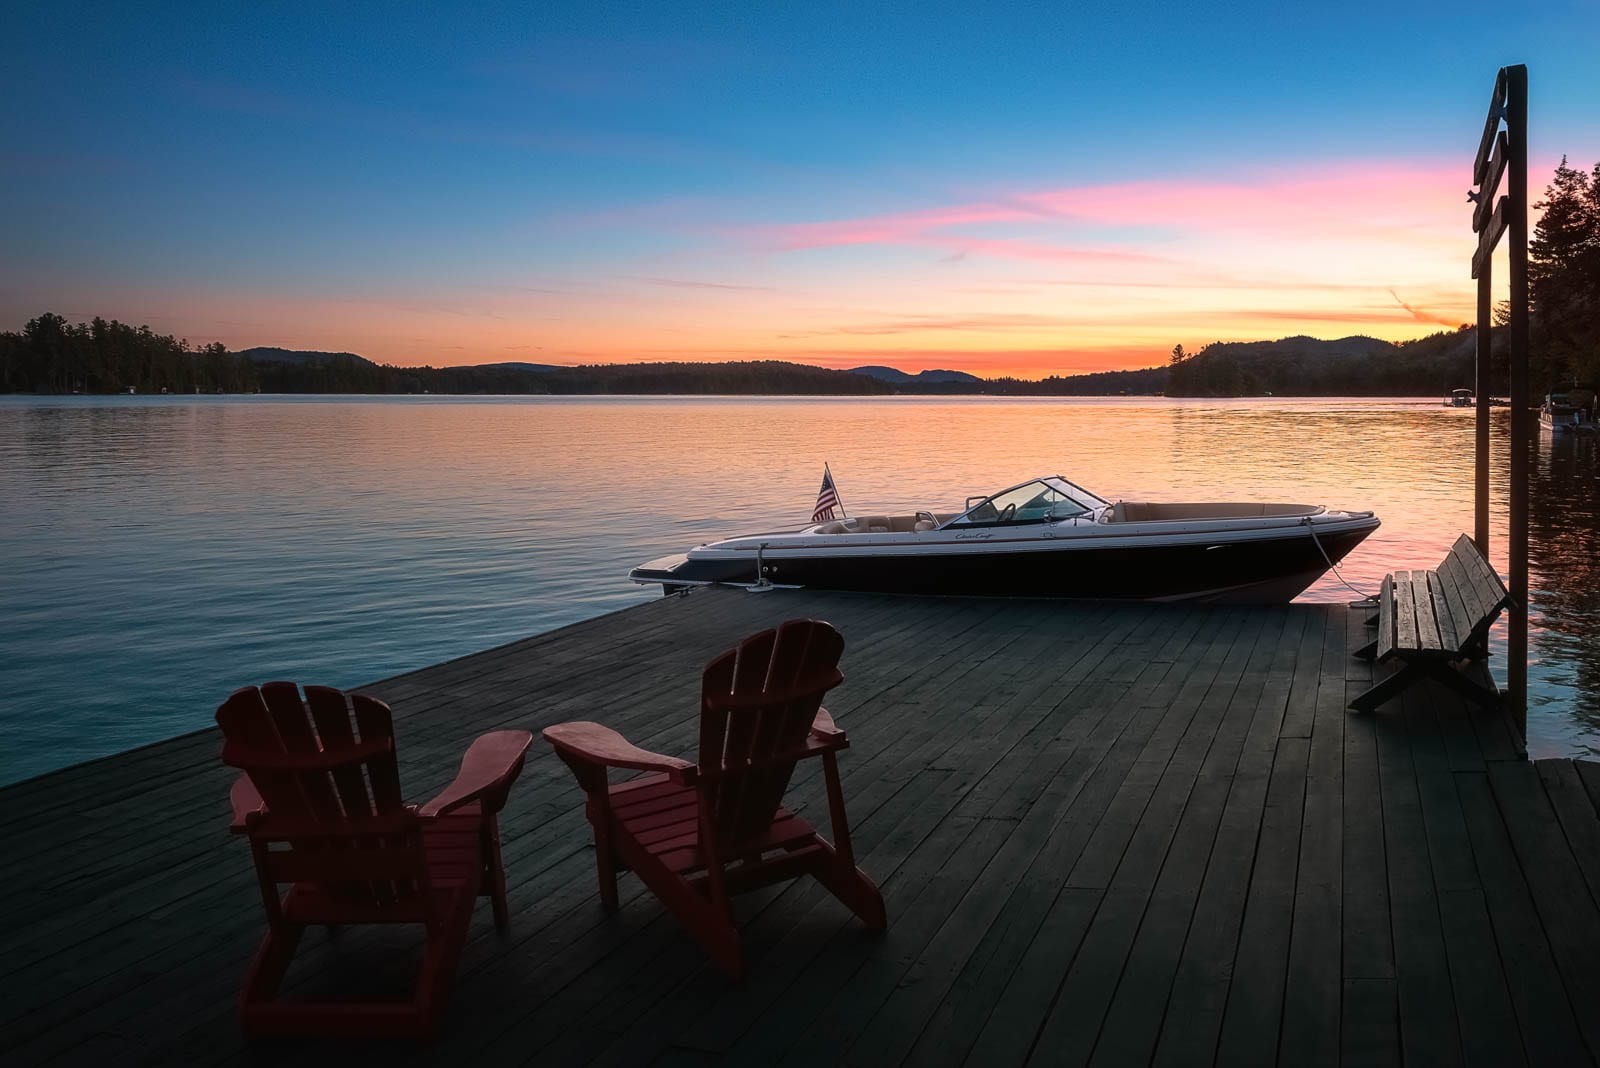 A dock with a boat and red chairs at sunset.